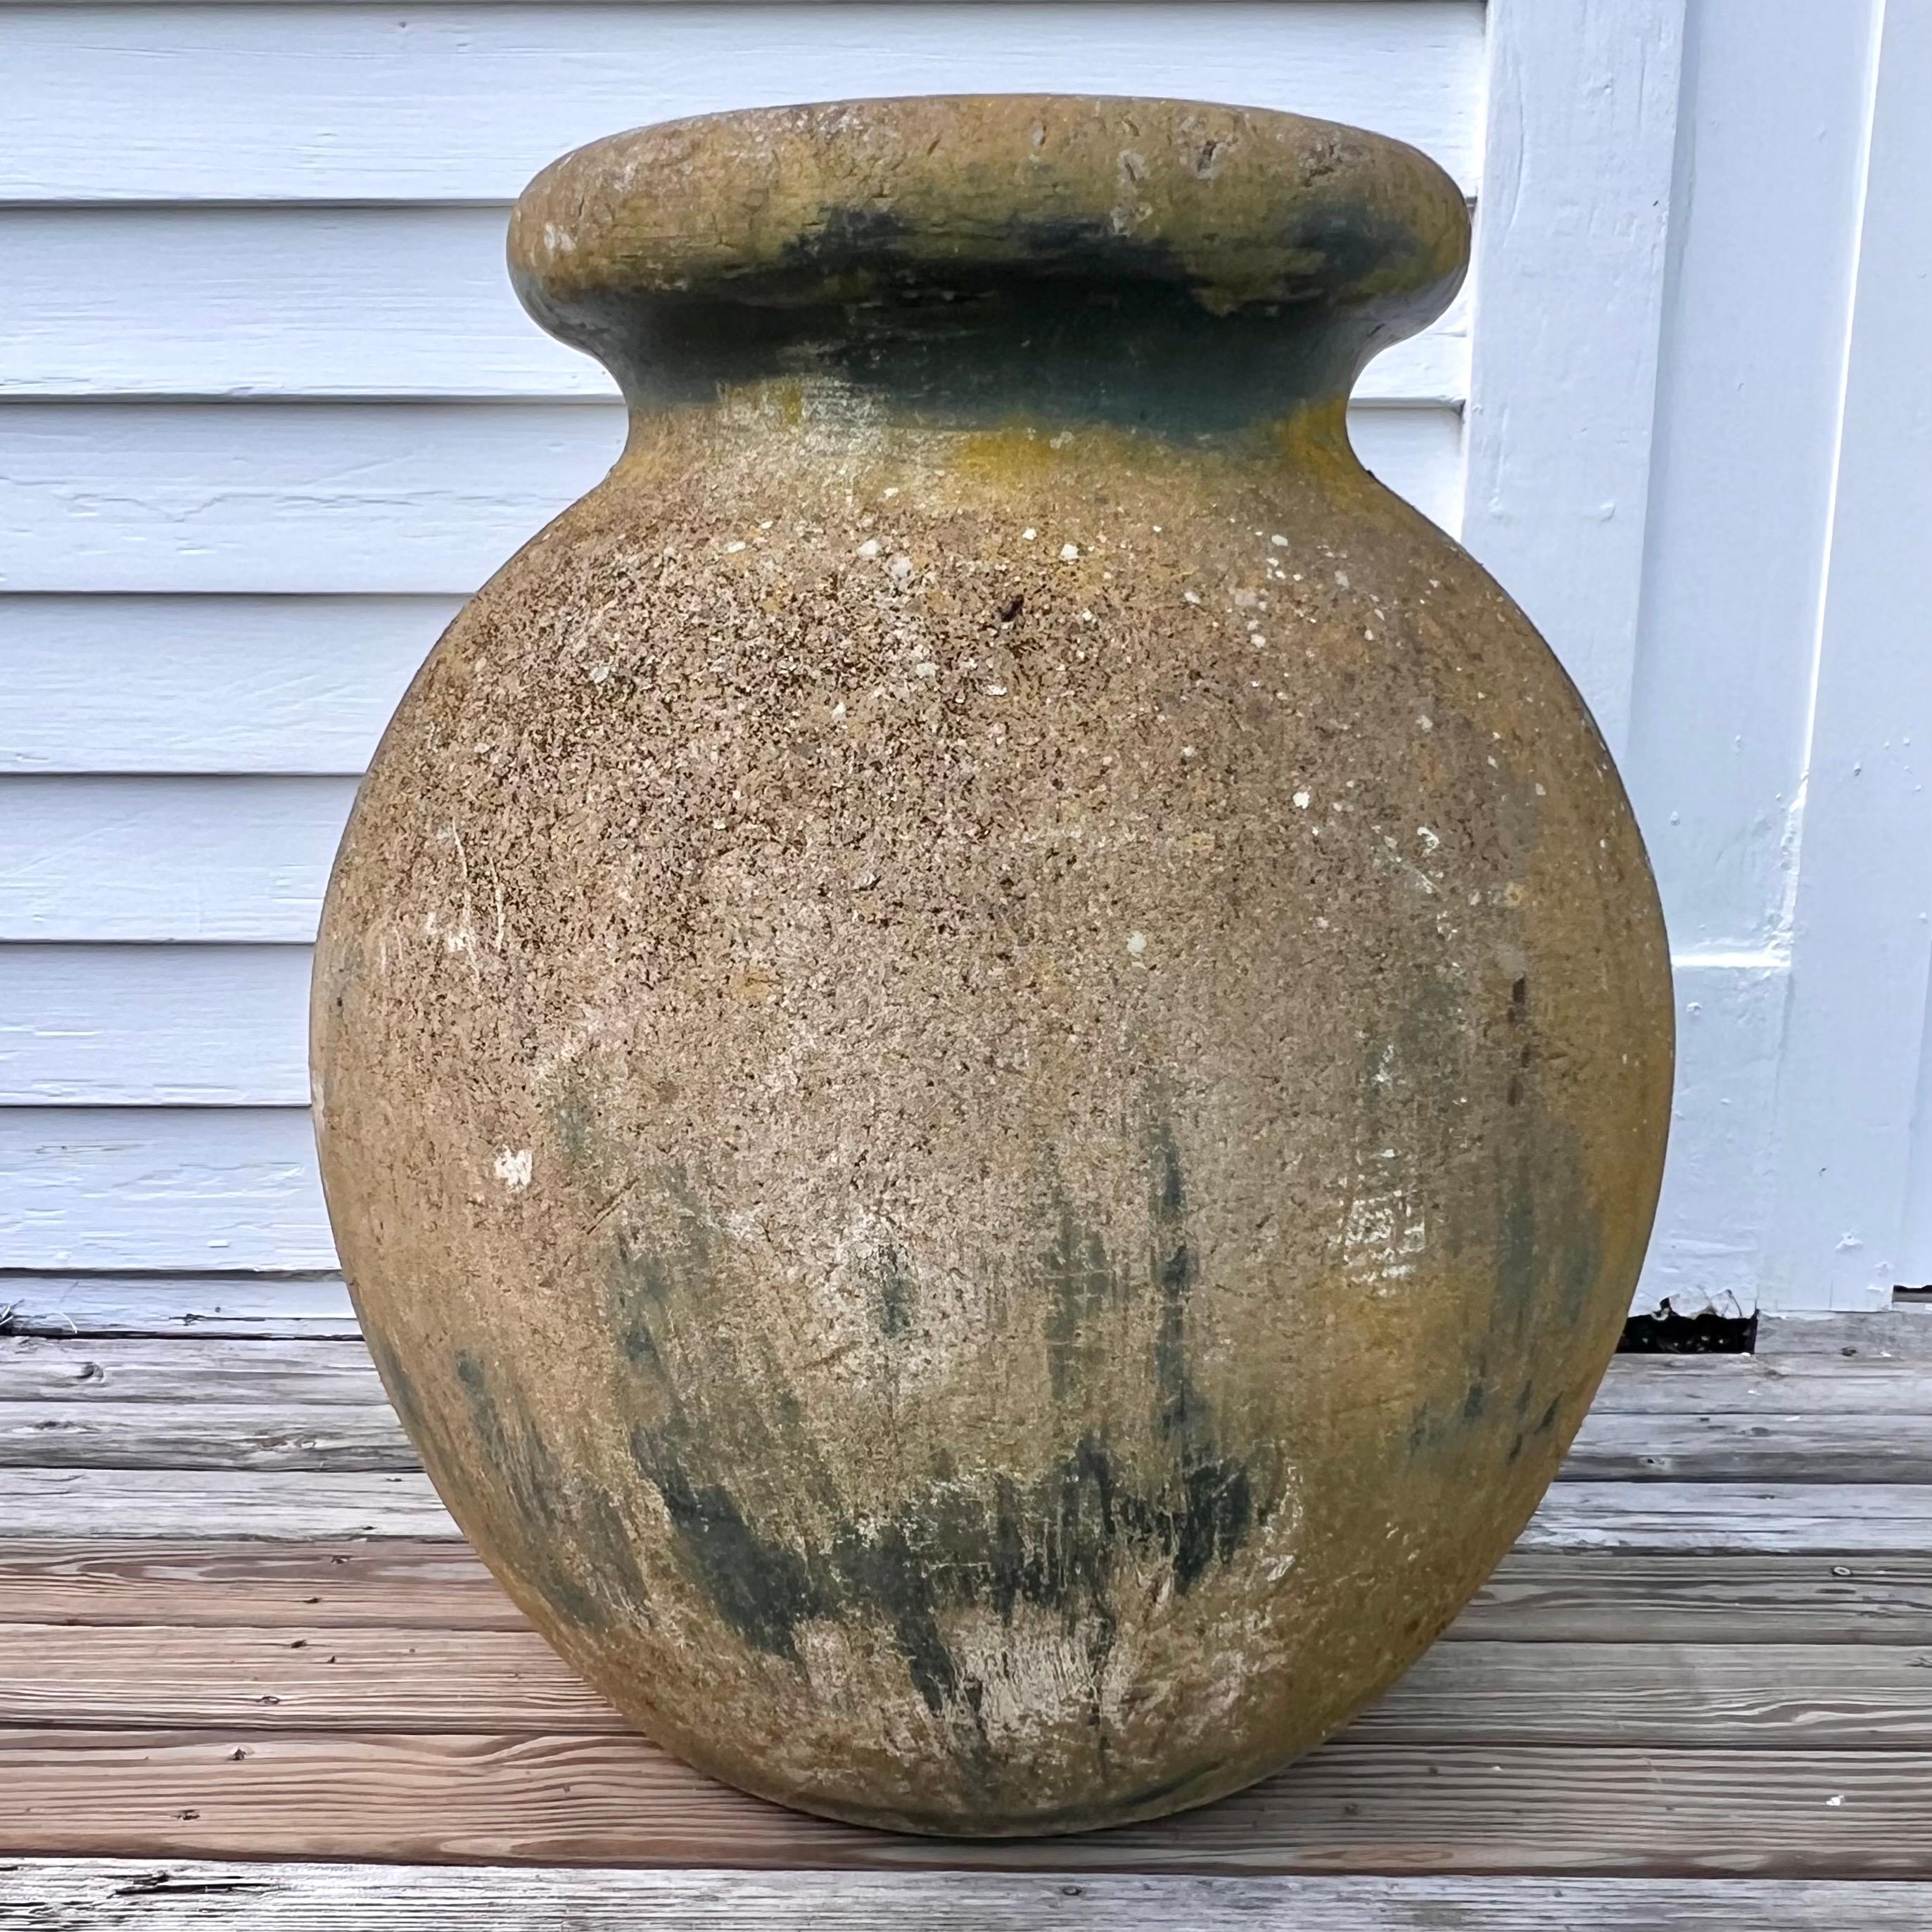 Concrete Colossal Willy Guhl Olive Jar Planter, 1960s Switzerland For Sale